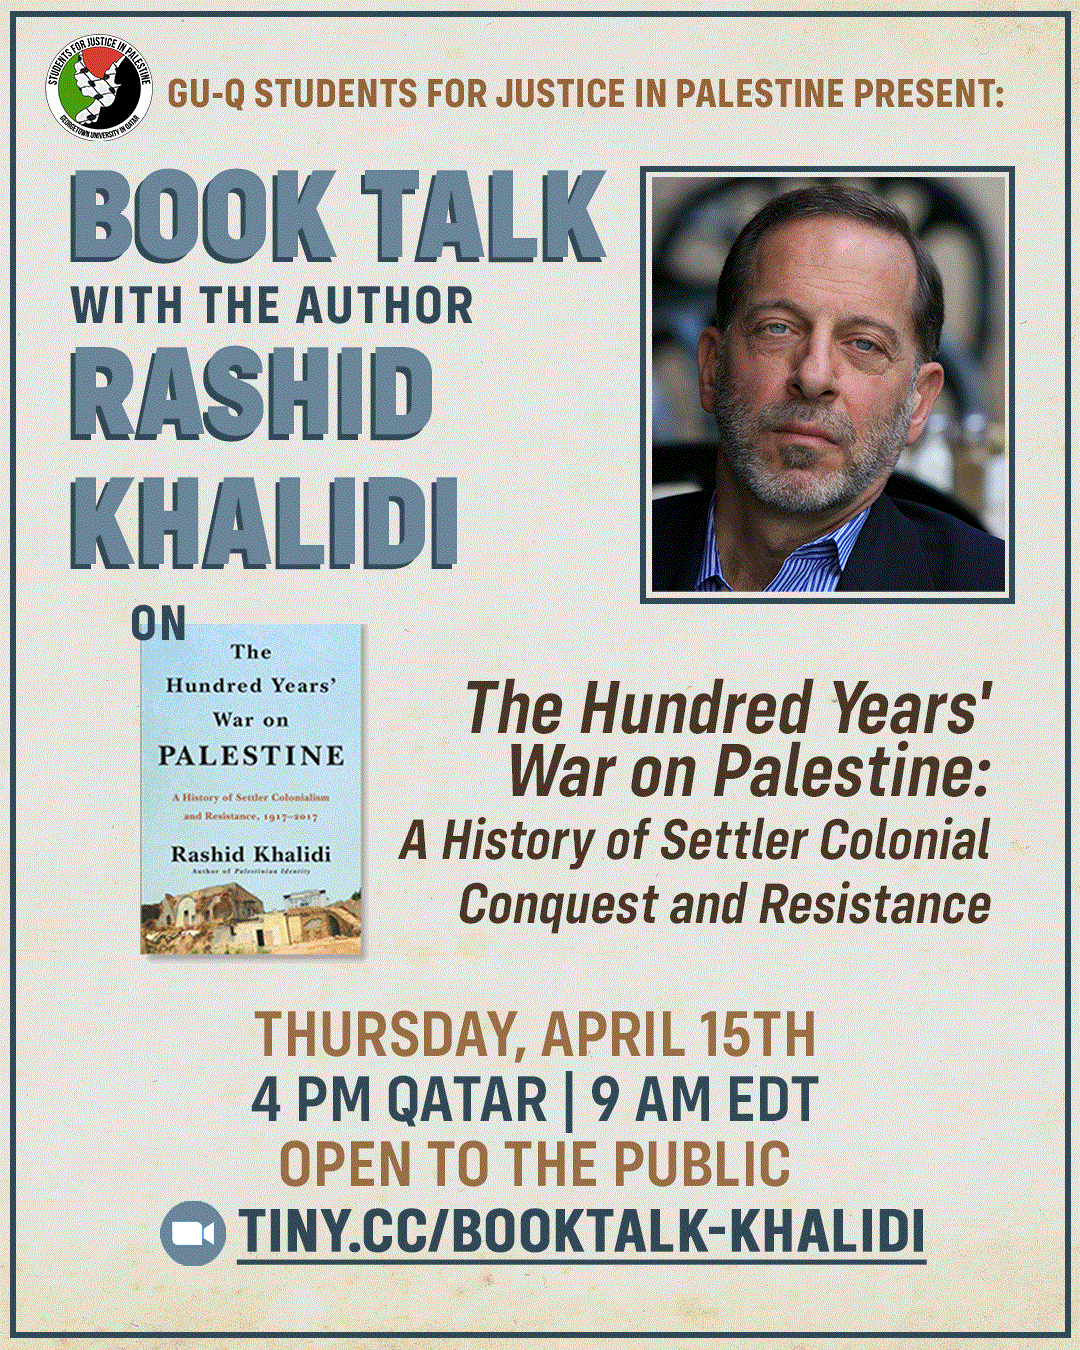 Poster for book talk event with author Rashid Khalidi